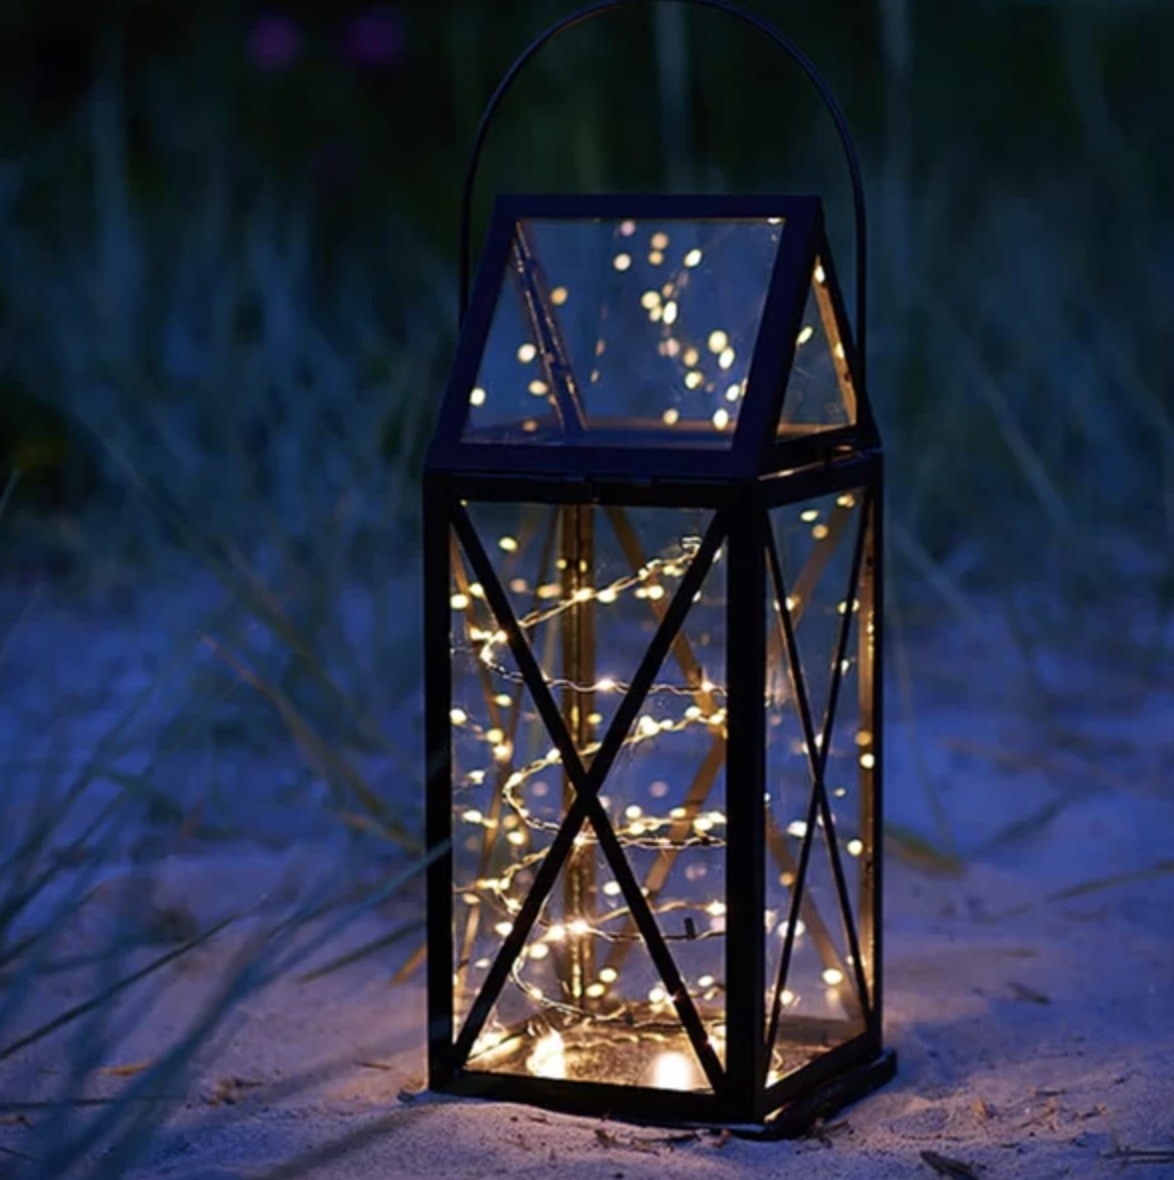 The lit fairy lights are inside a black and clear panel lantern outside